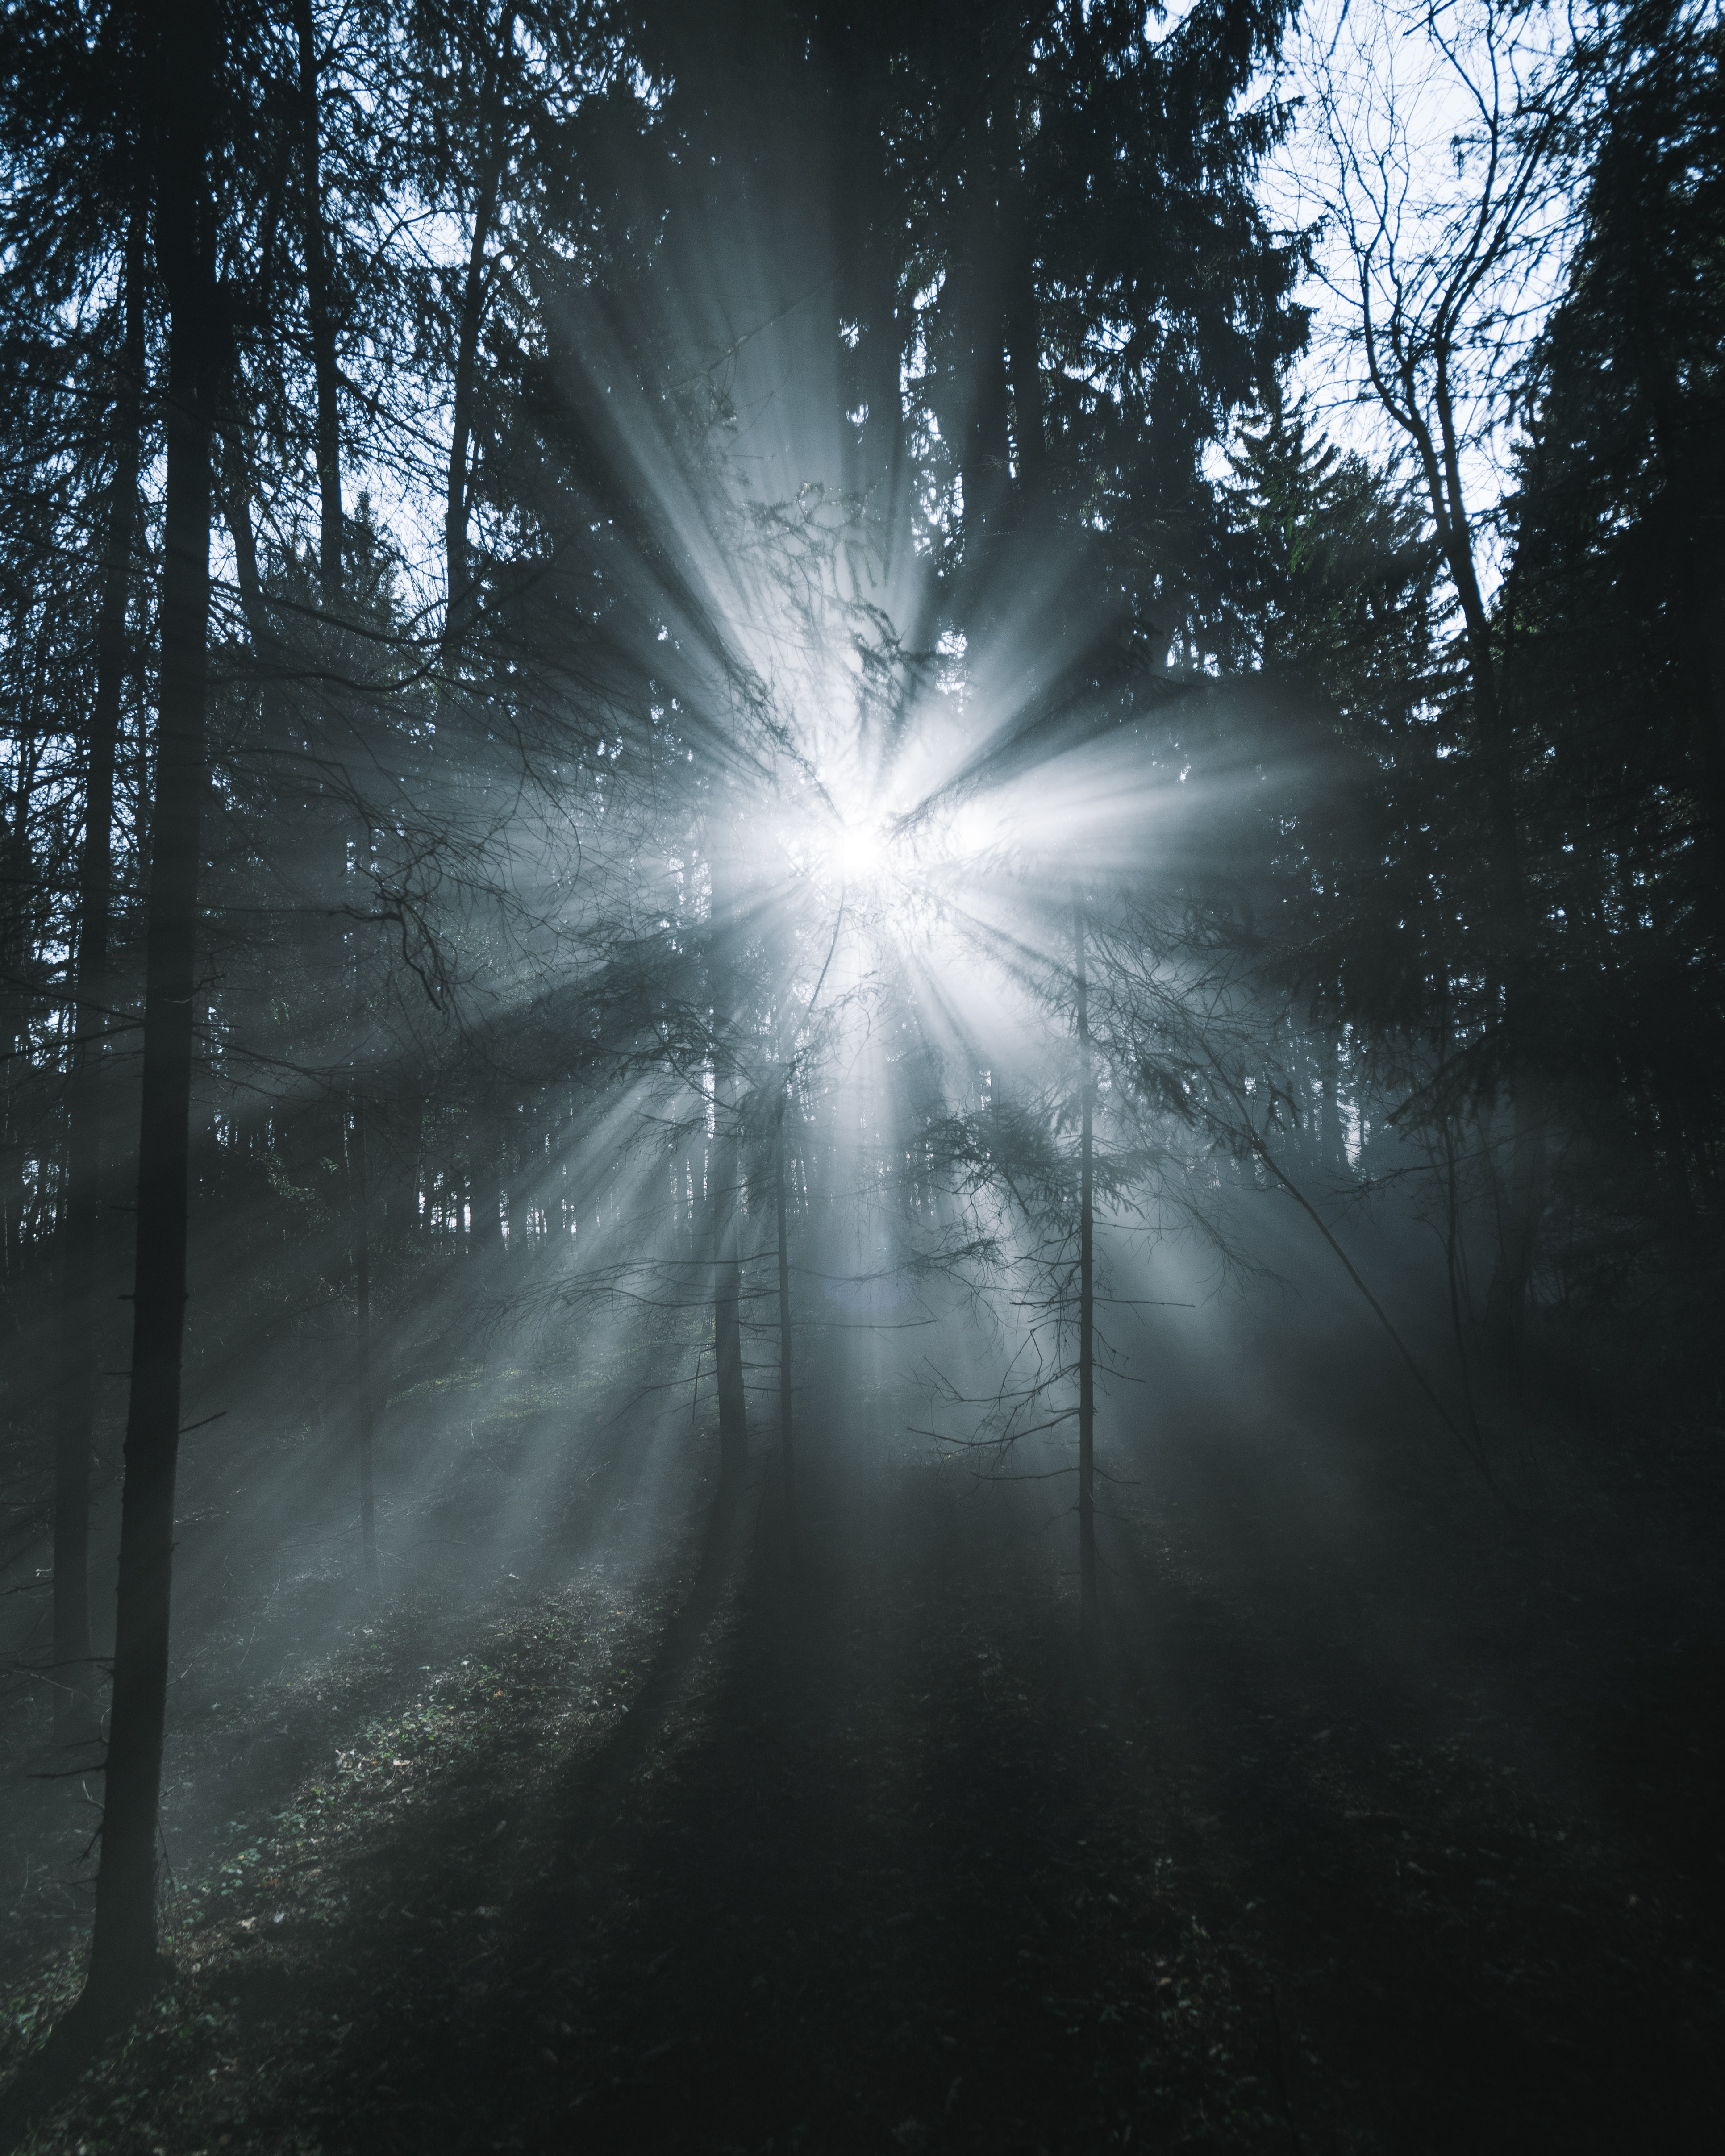 Hd 1080p Images glow, beams, trees, forest